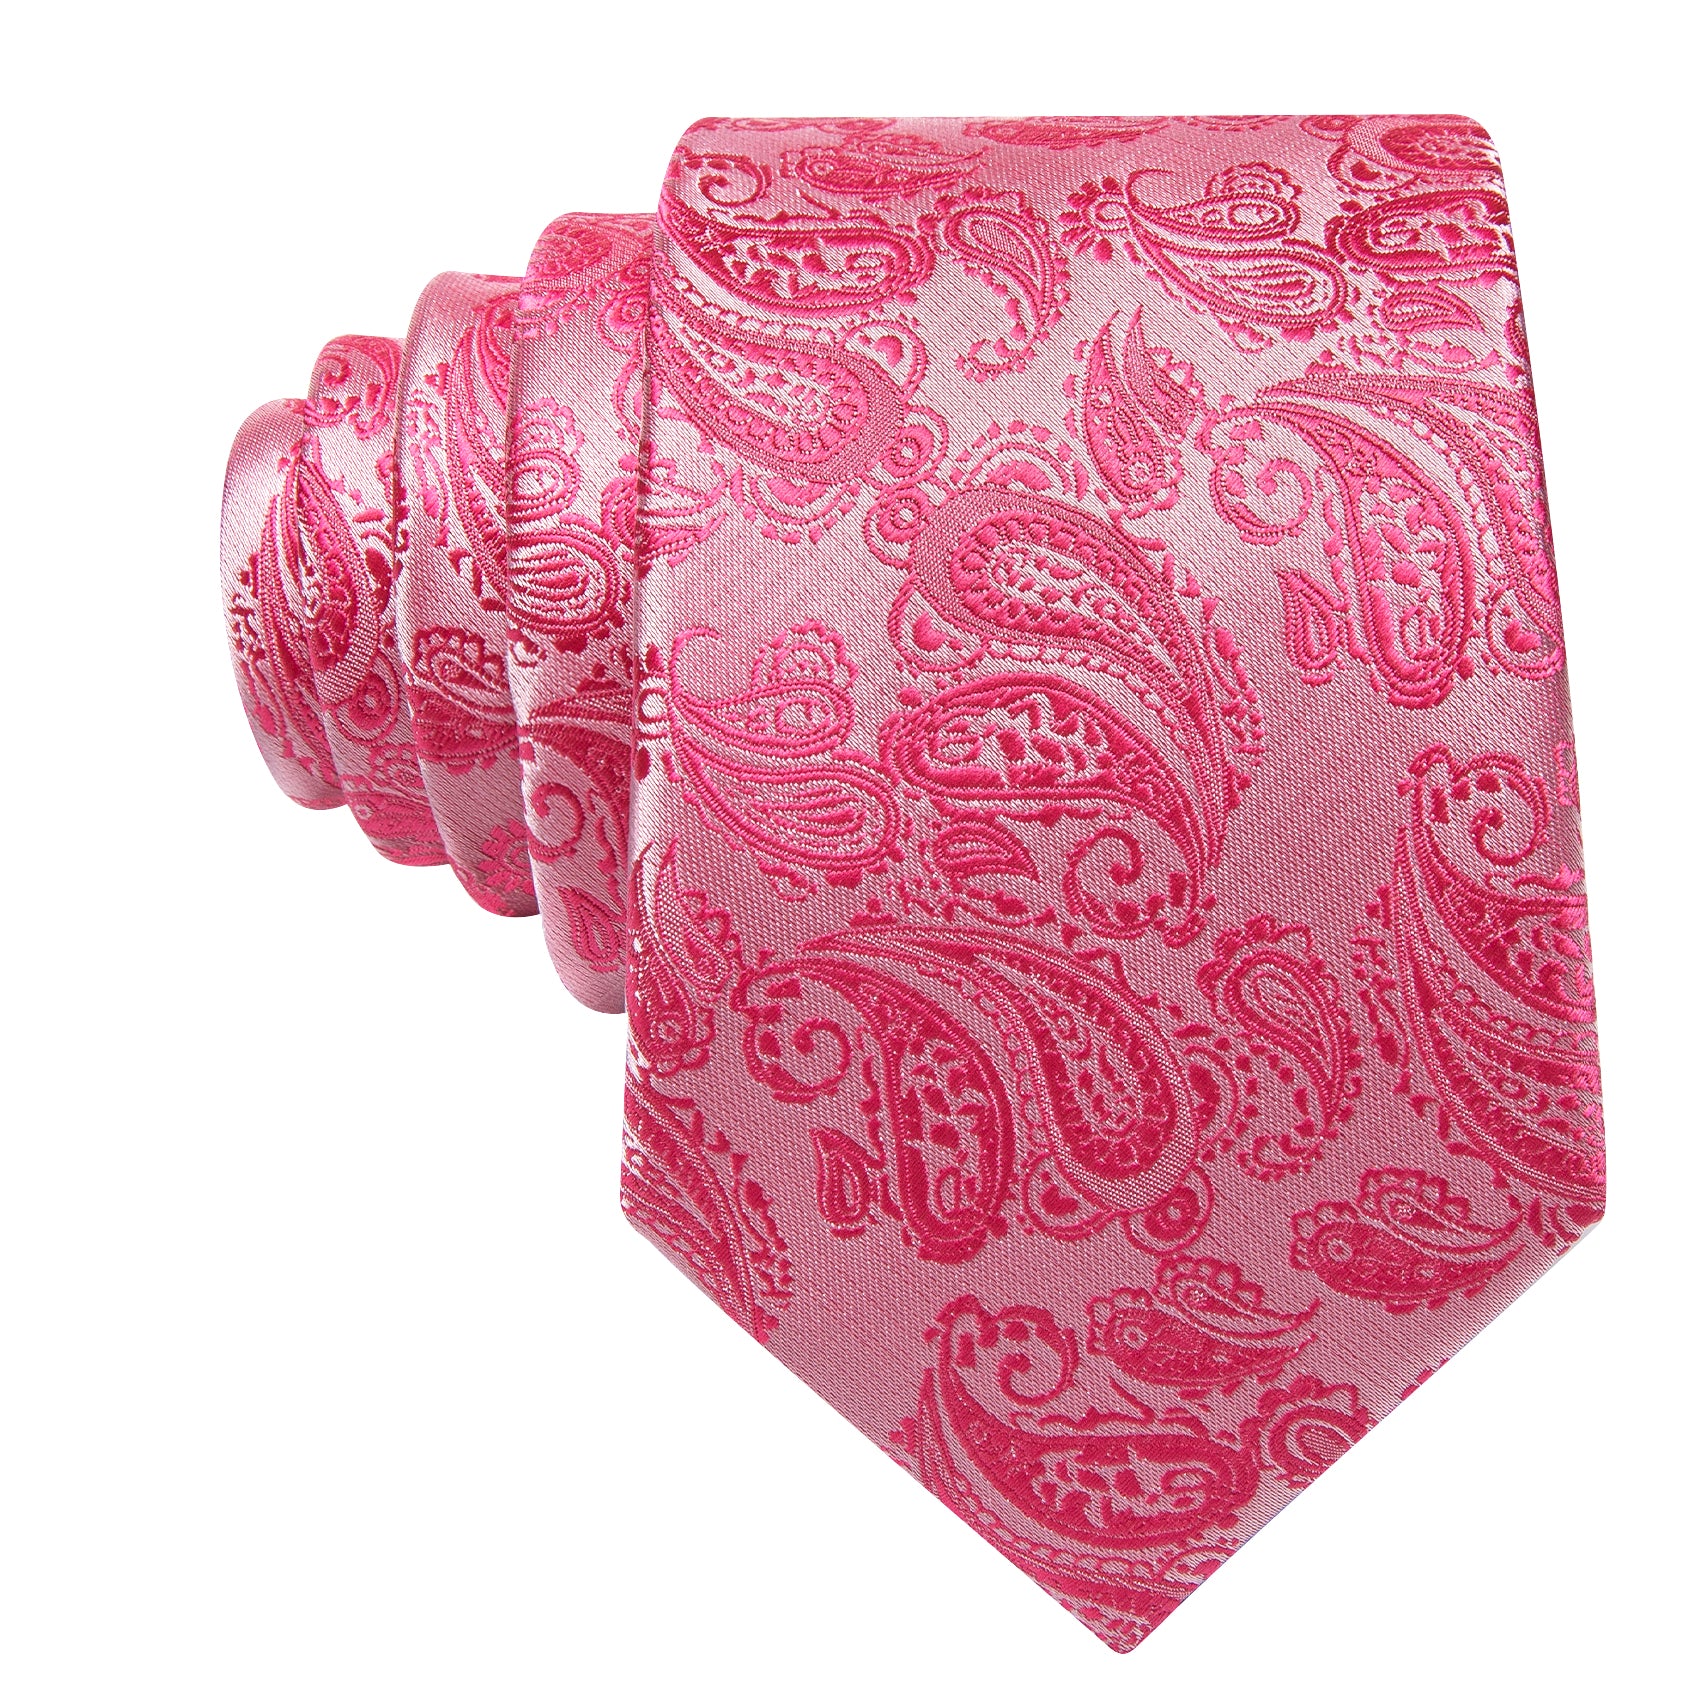 Orchid Paisley Silk 63 Inches Extra Long Tie Hanky Cufflinks Set